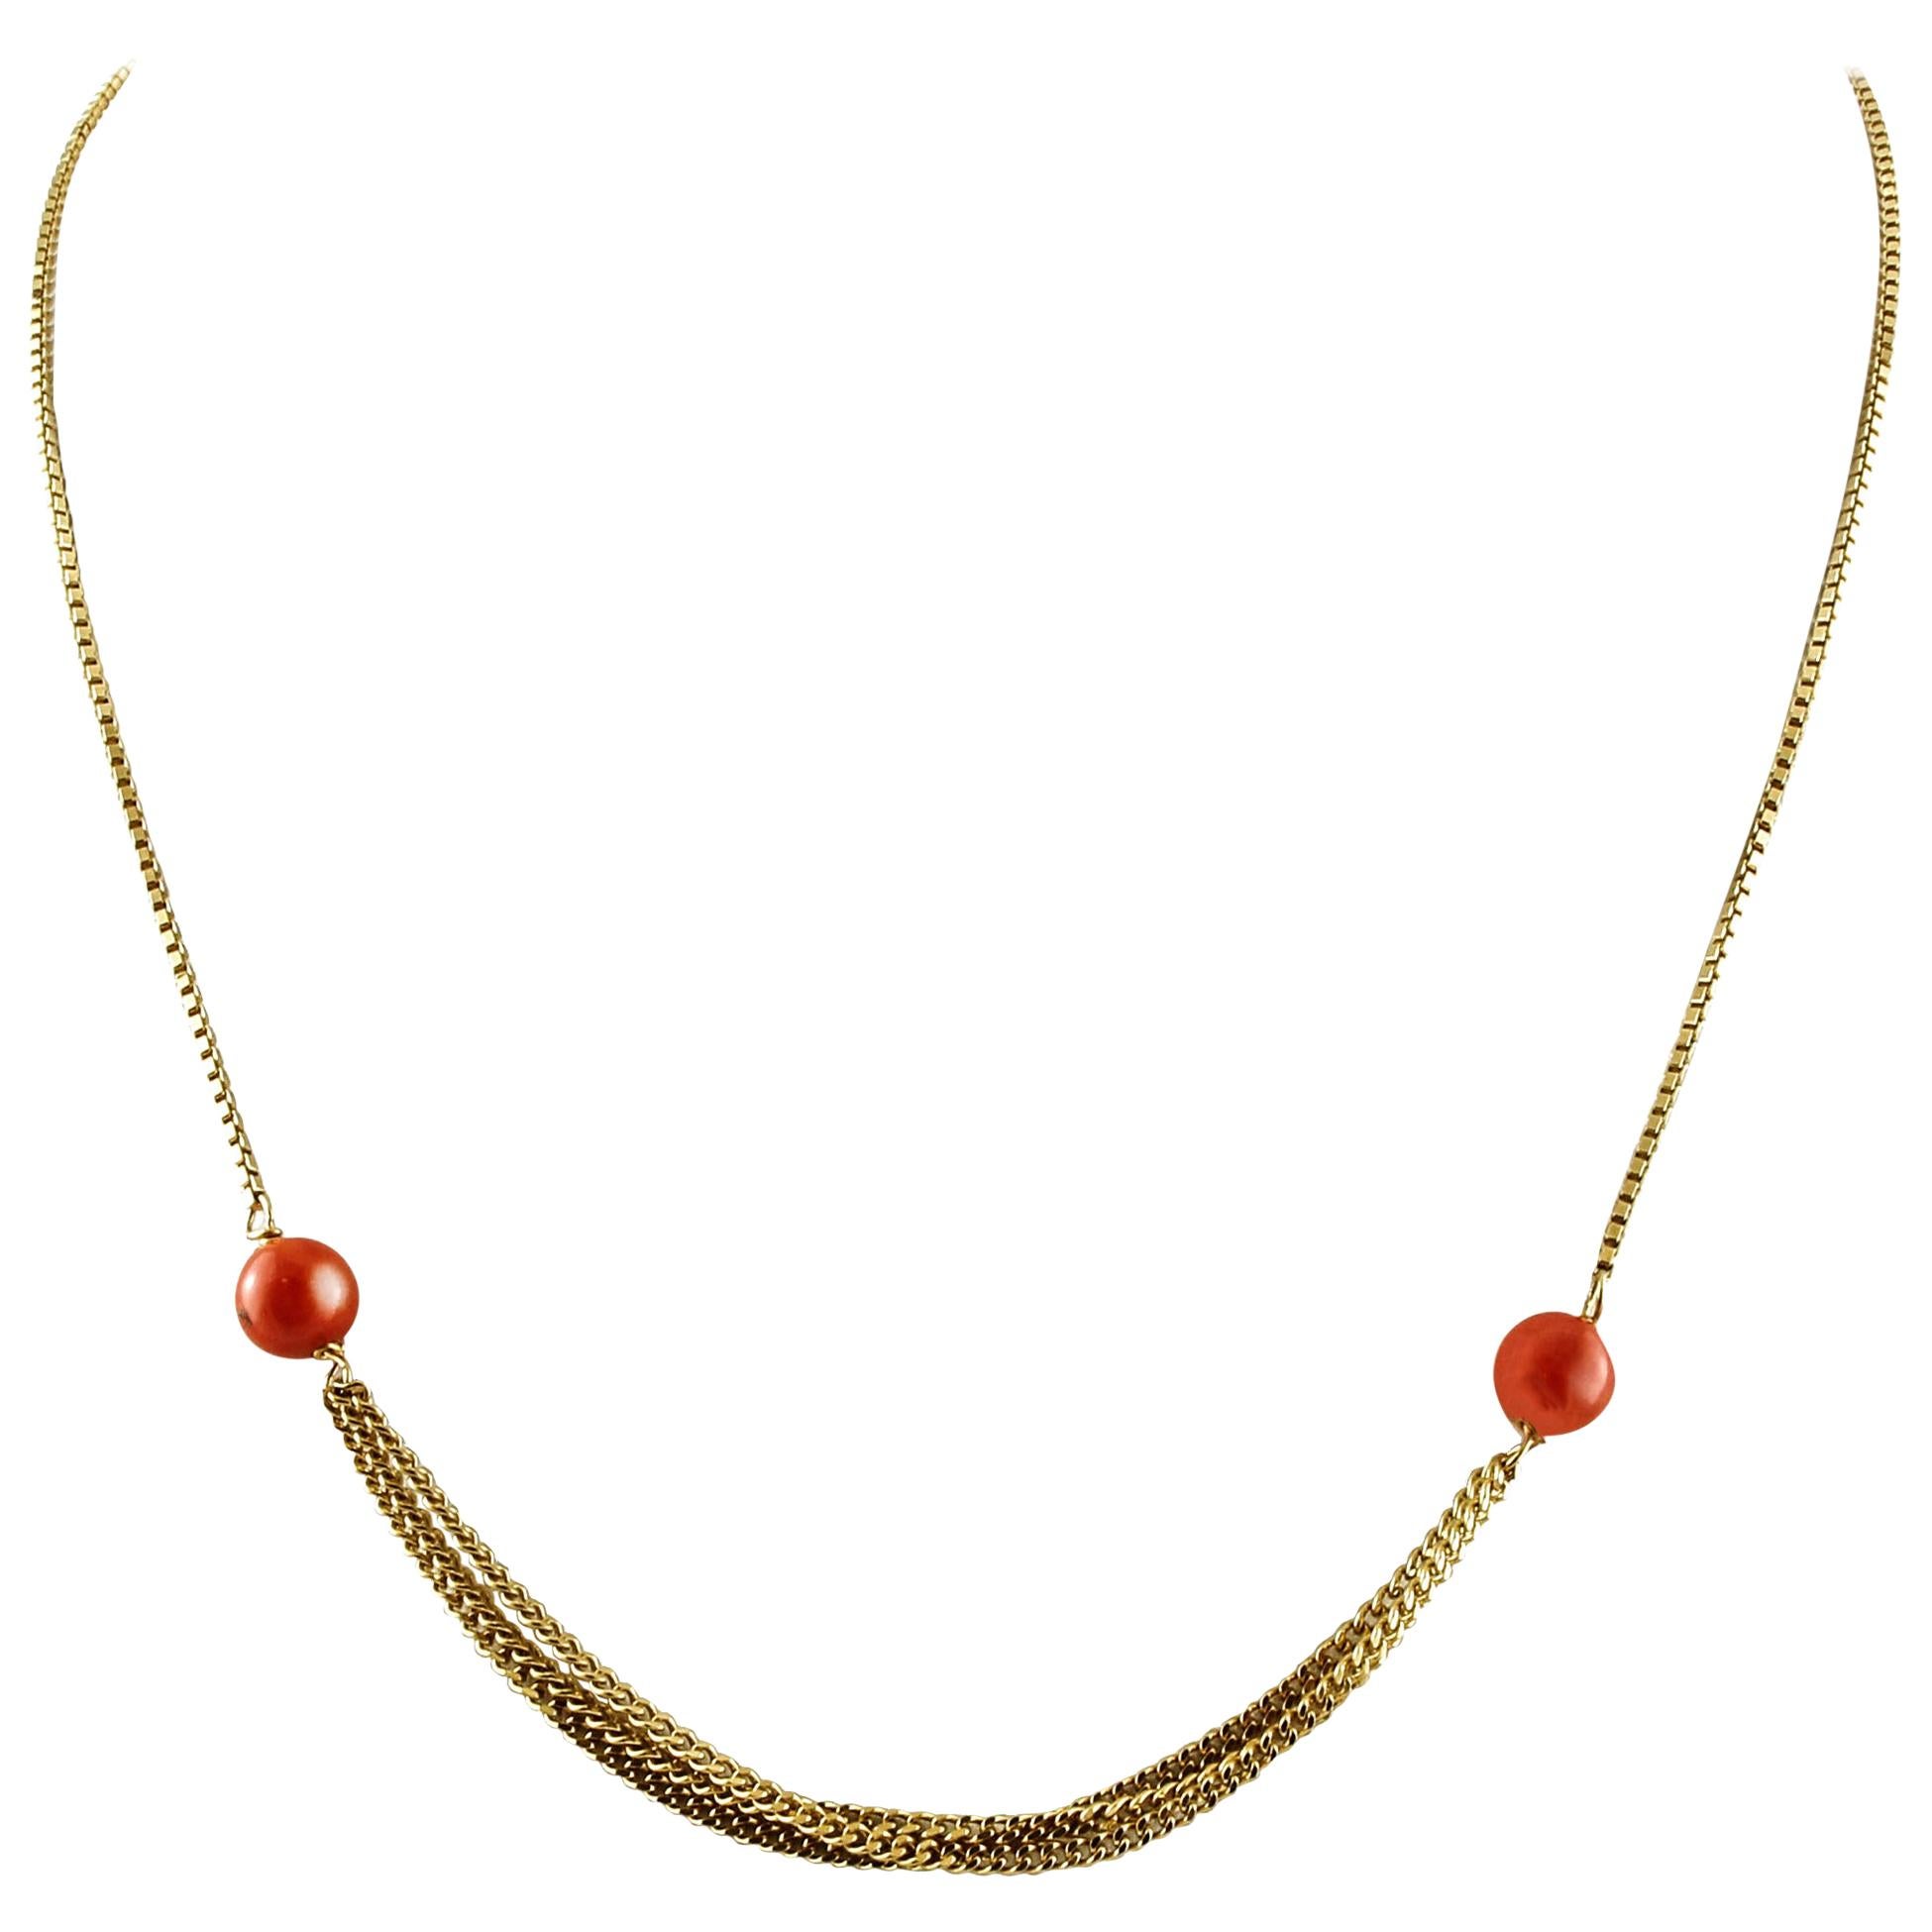 18 Karat Yellow Gold Chain and Red Spheres Coral Retrò Necklace